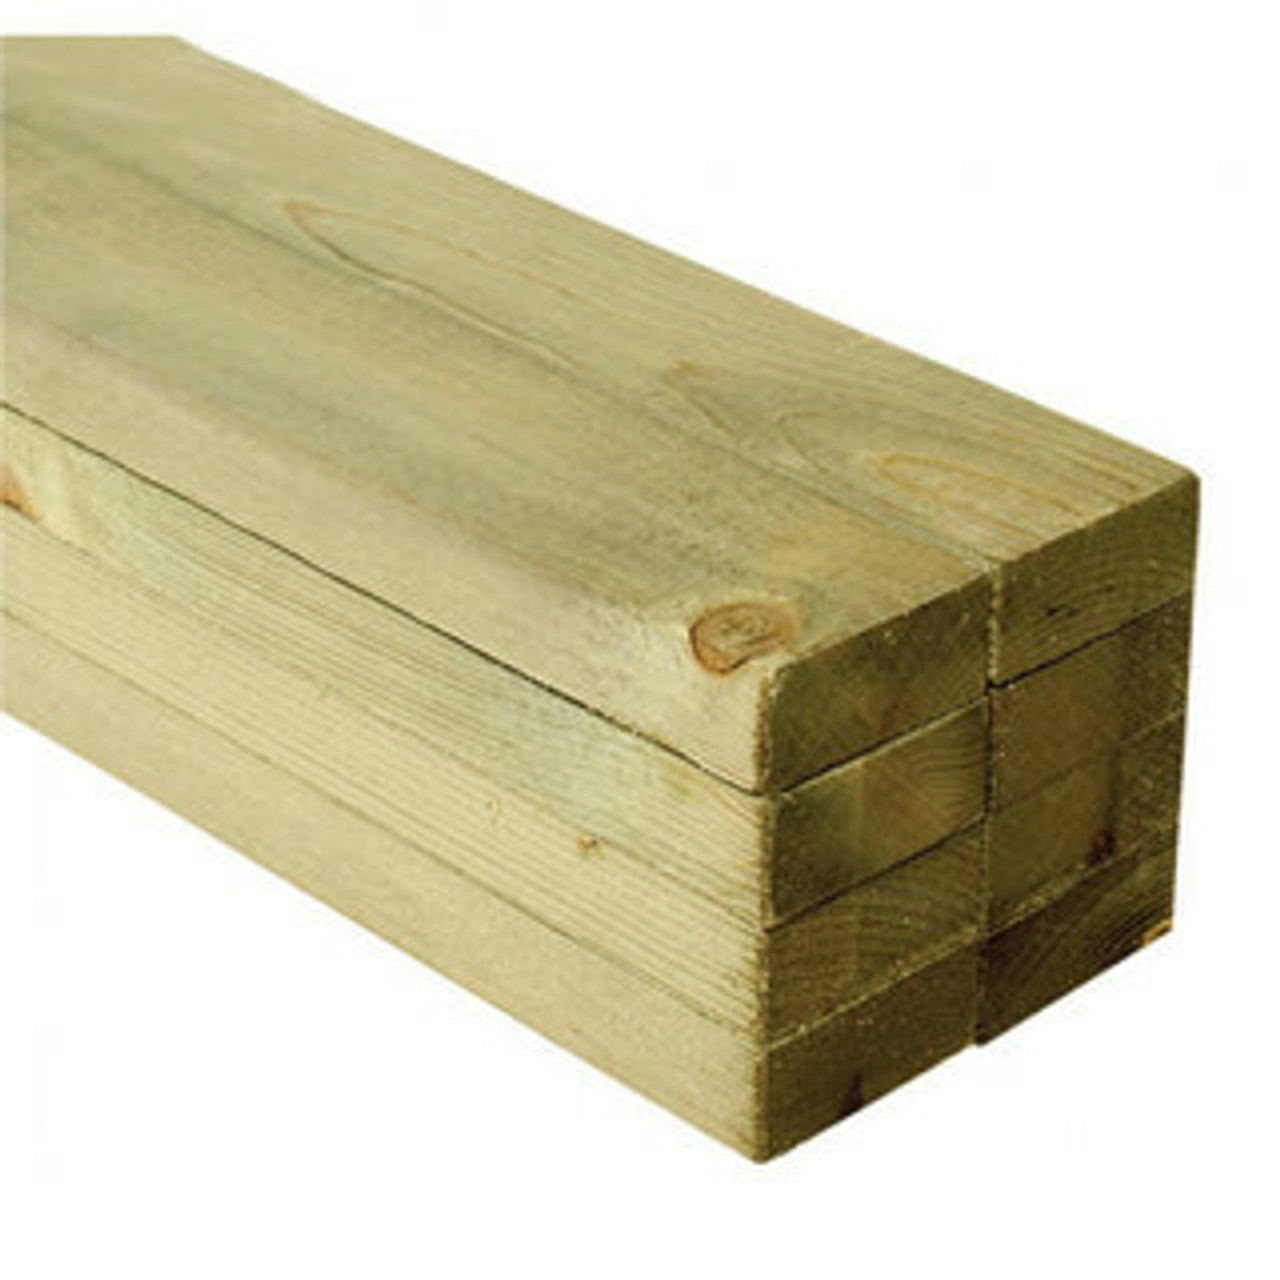 Ungraded Treated Timber